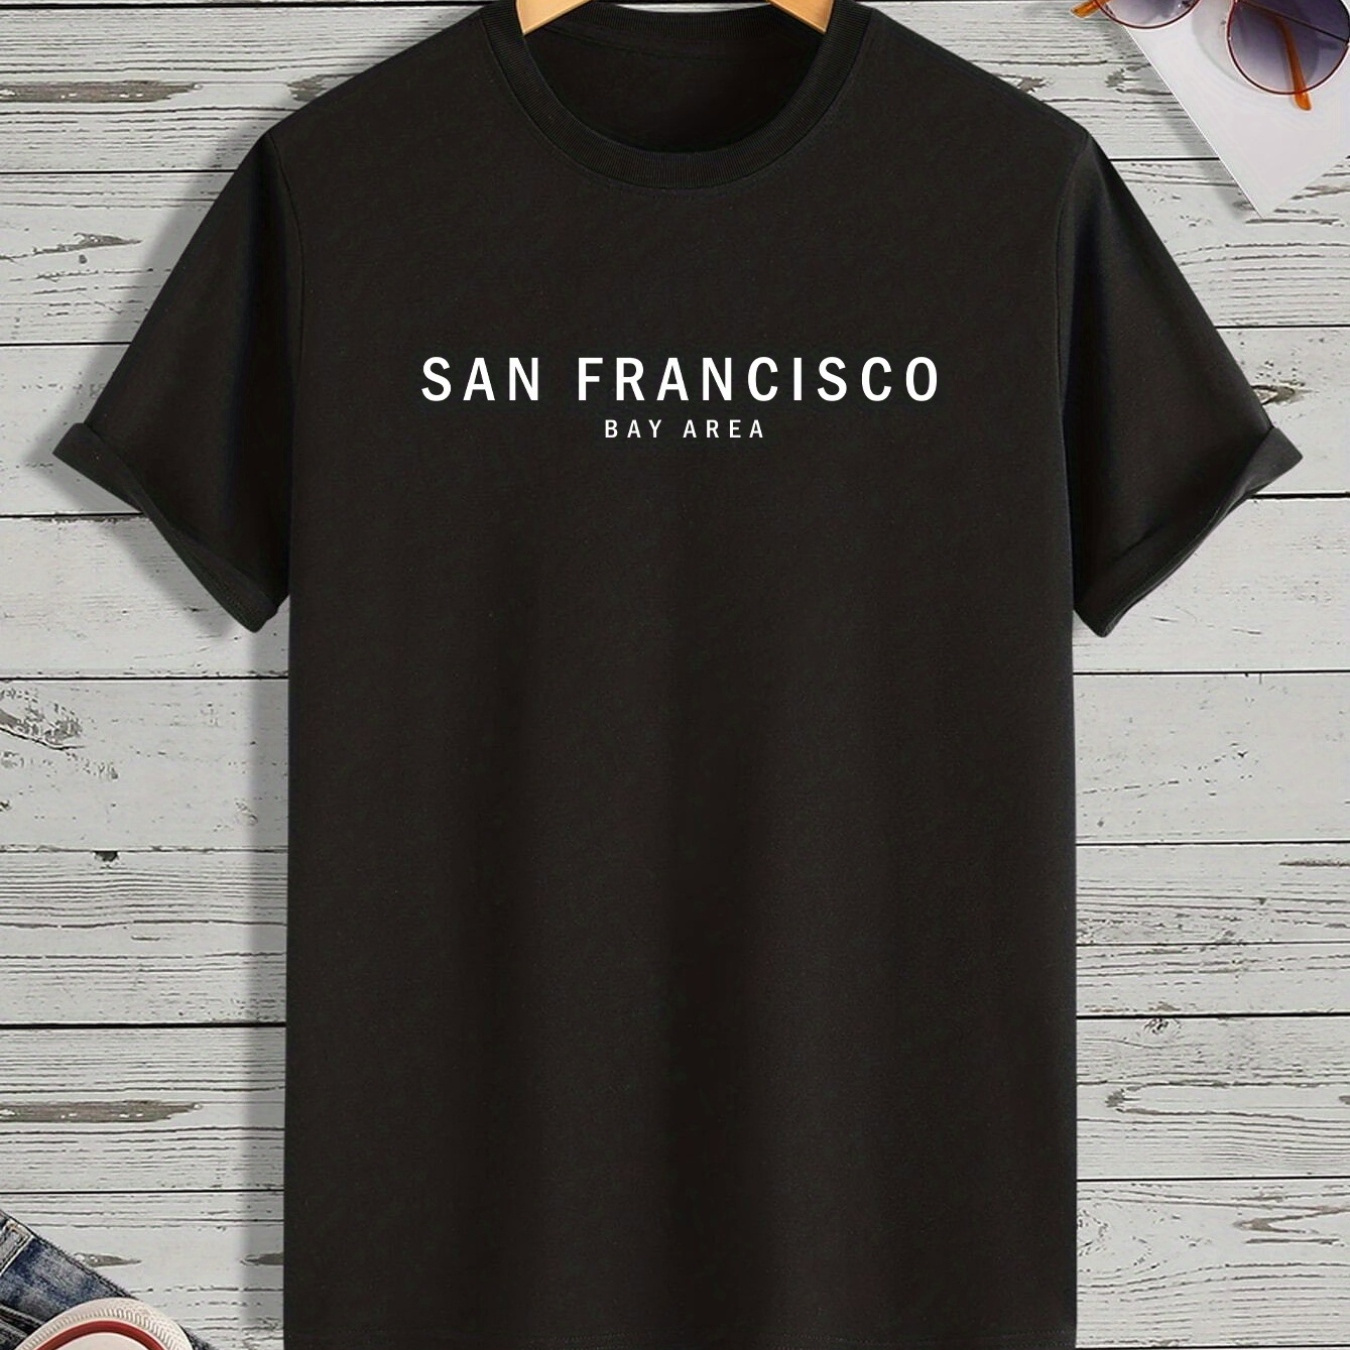 

San Francisco Bay Area, Men's Casual Slightly Stretch Crew Neck Graphic Tee, Male Clothes For Summer